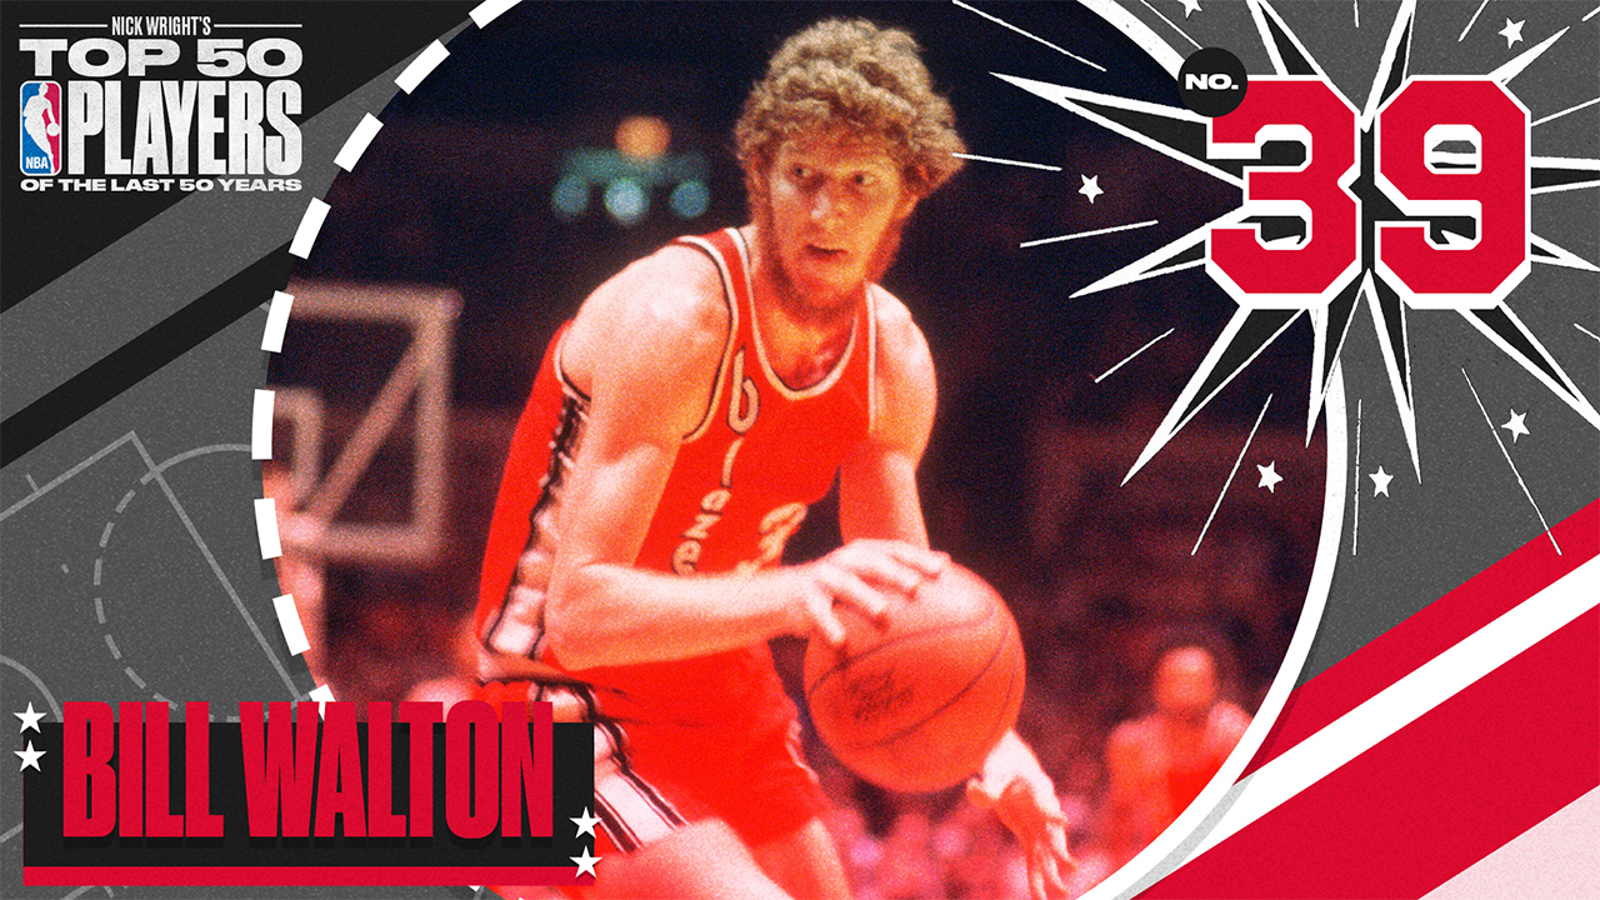 Bill Walton is Nick Wright's 50th Greatest NBA Player of the Last 50 Years